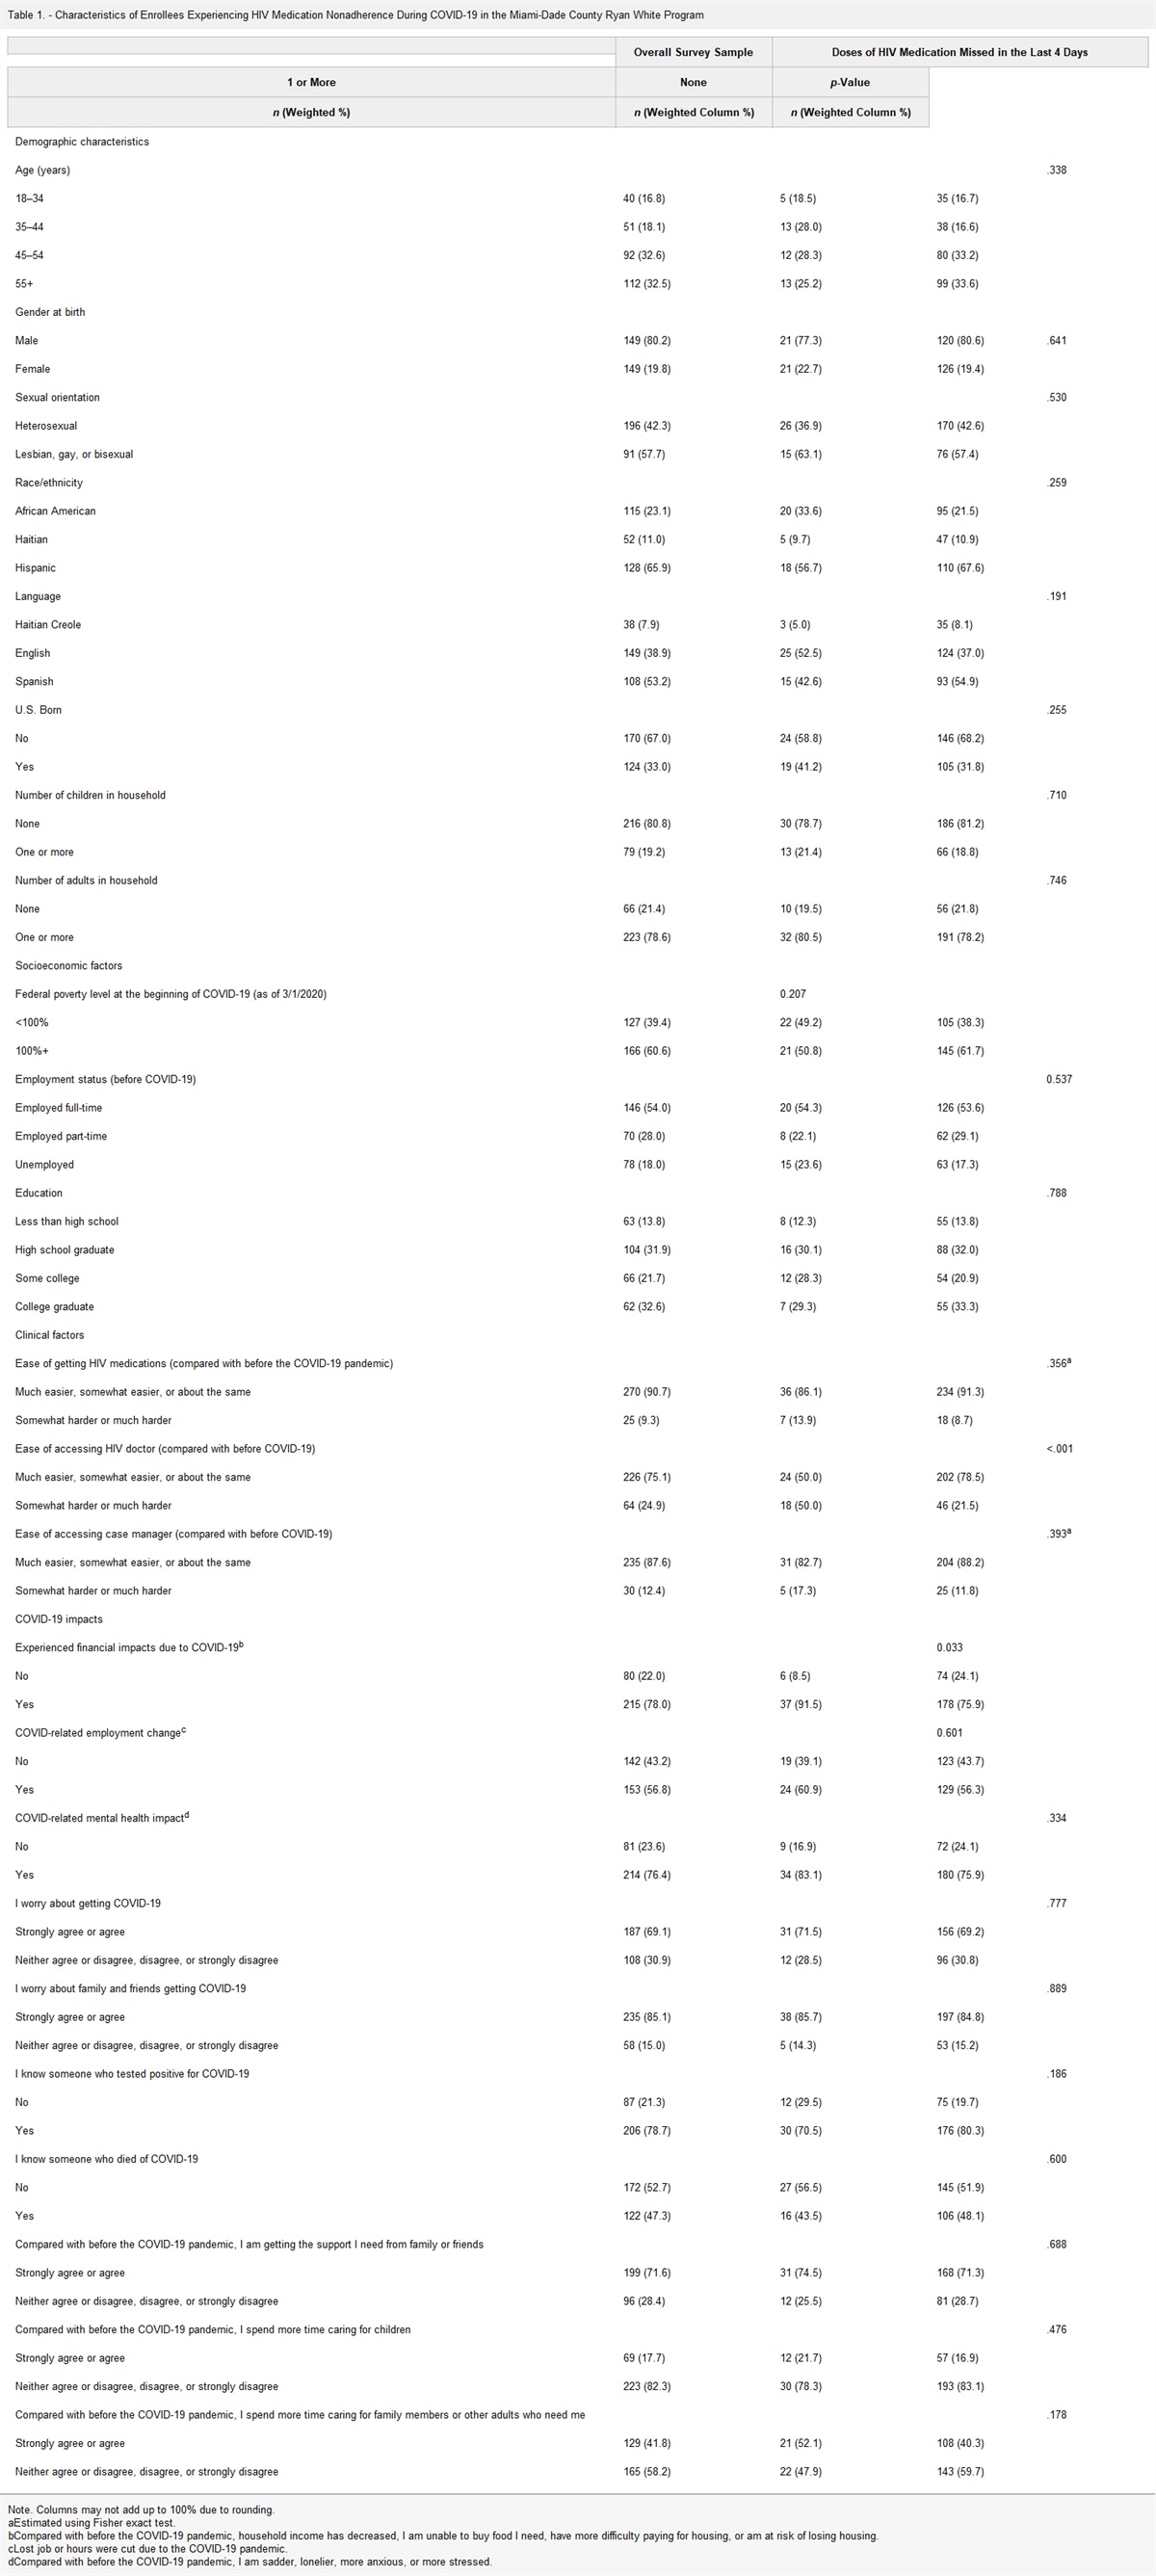 Self-reported Nonadherence to Antiretroviral Therapy Among Miami-Dade Ryan White Program Clients During the COVID-19 Pandemic: A Cross-sectional Study